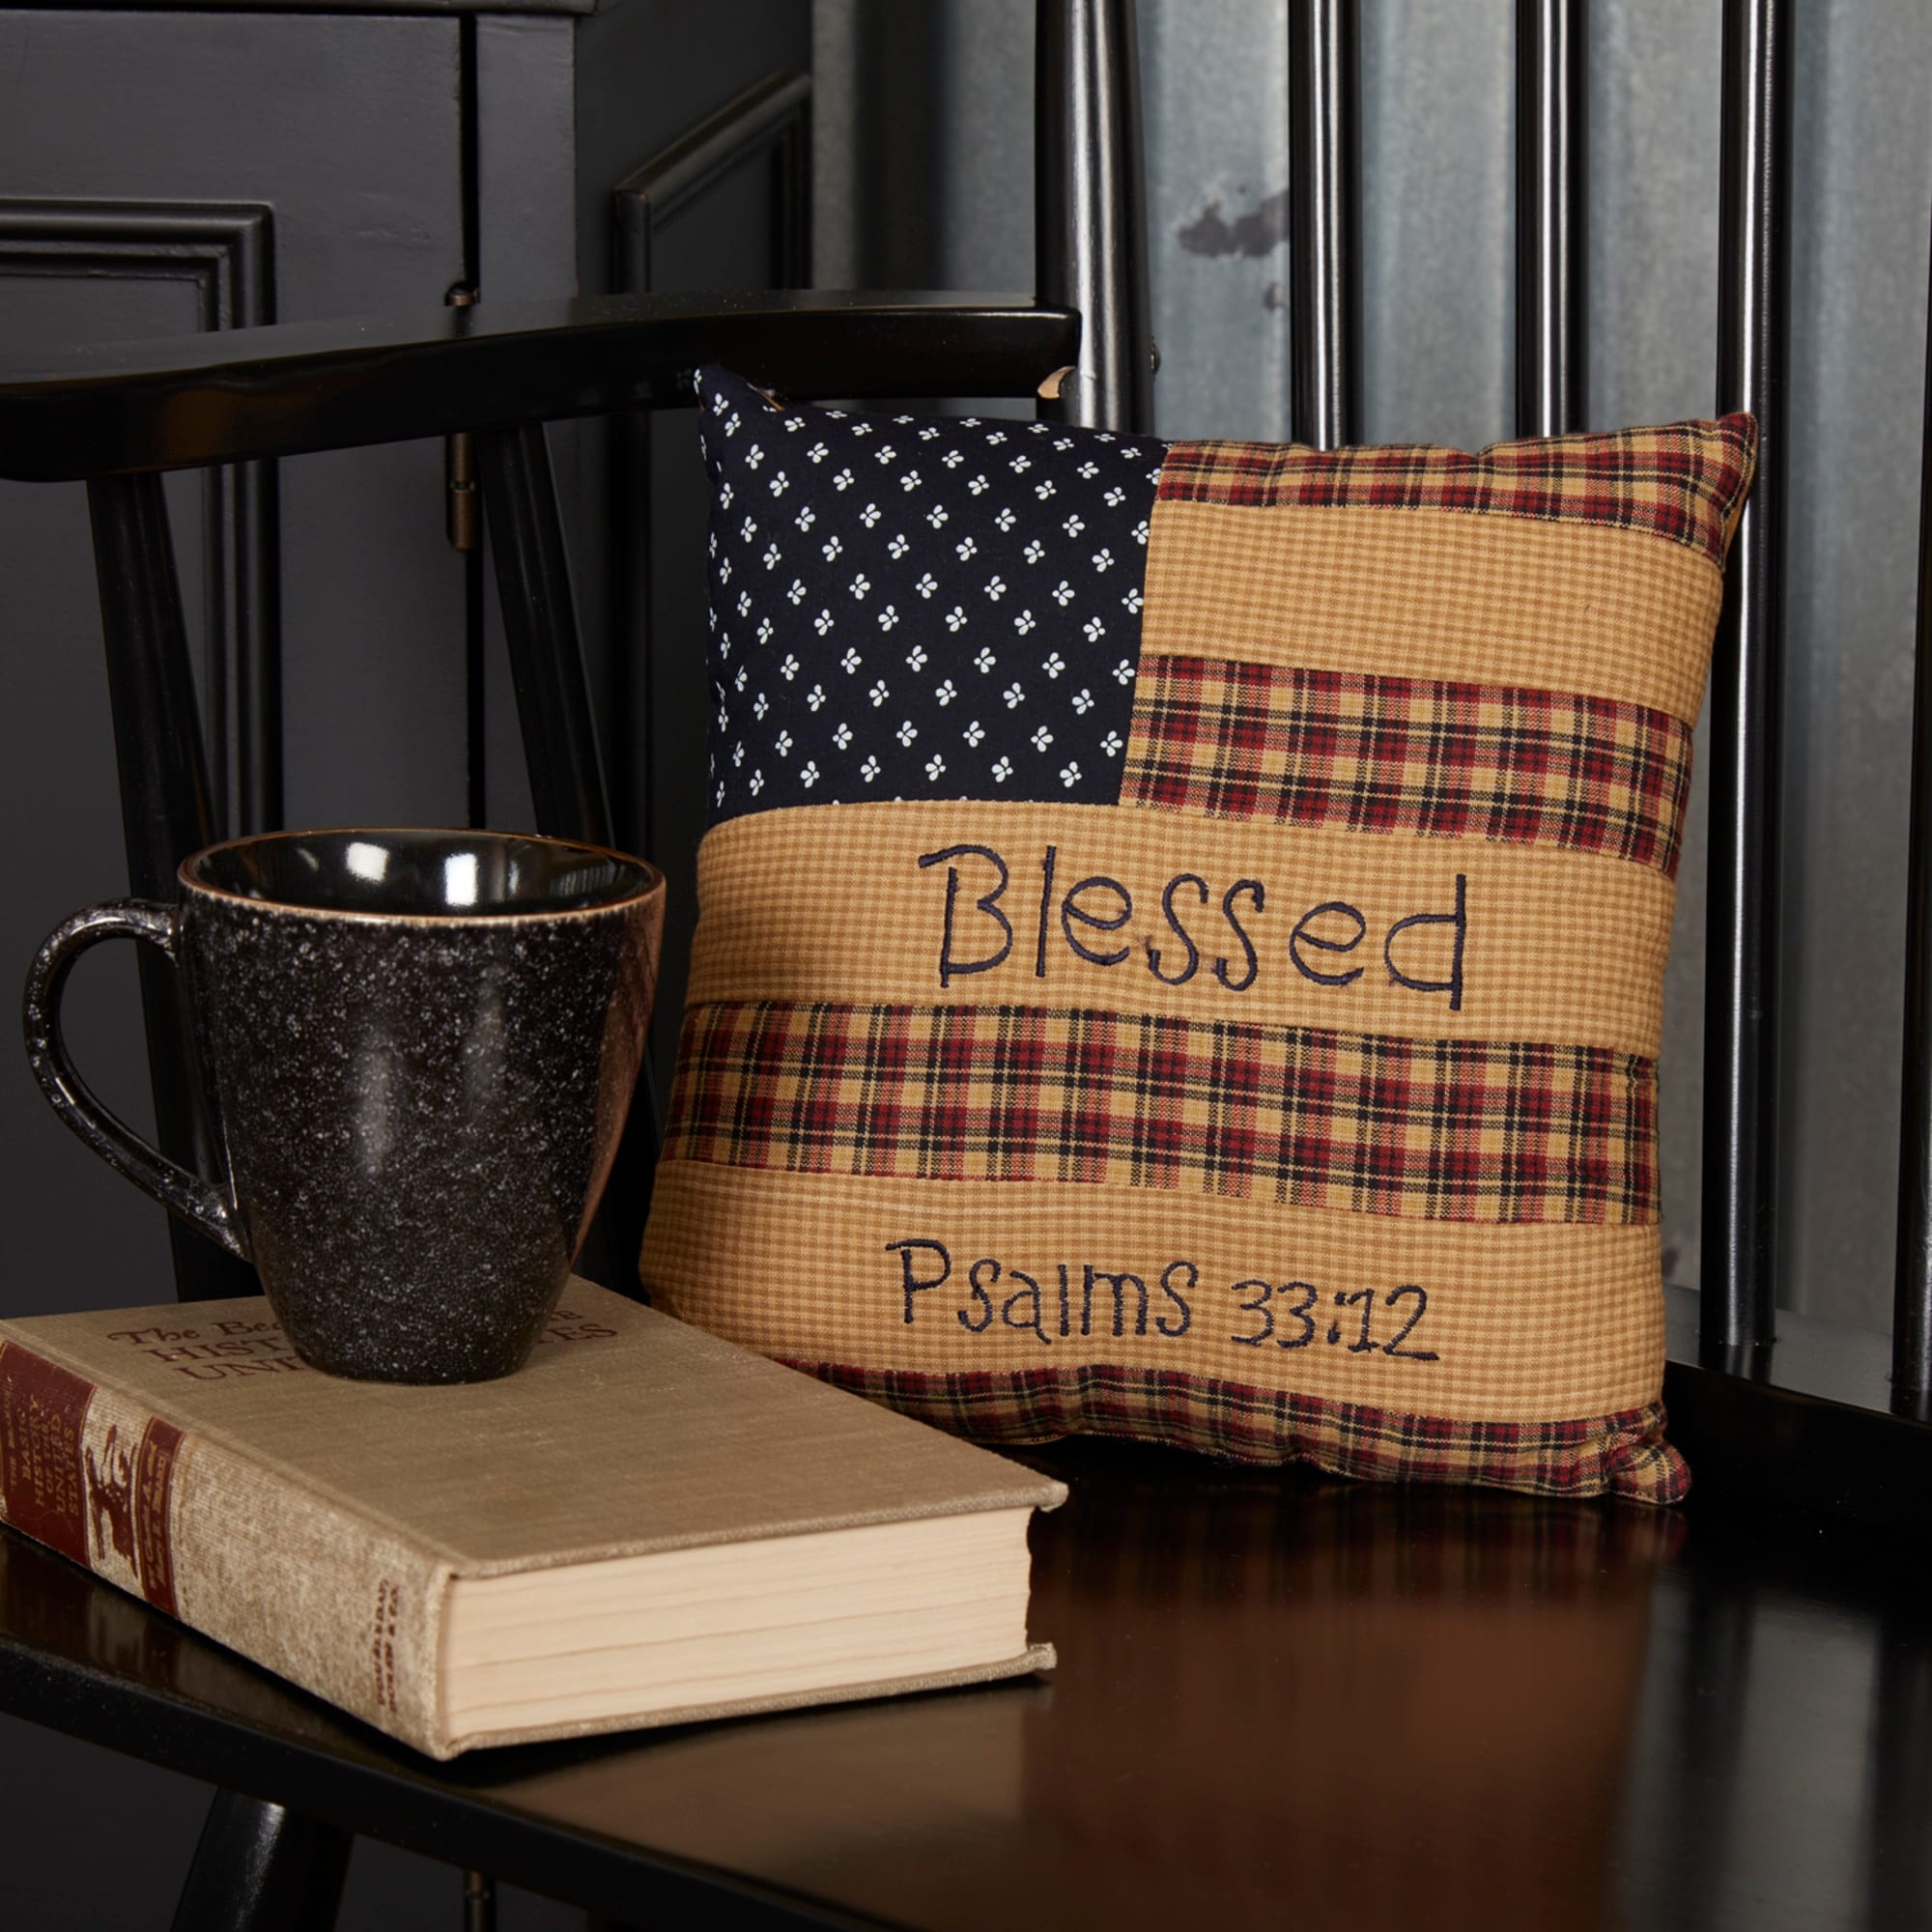 https://ak1.ostkcdn.com/images/products/is/images/direct/0c0d3453622eaabd223f0fdba7f72fac96acee32/Patriotic-Patch-Pillow-Blessed-10x10.jpg